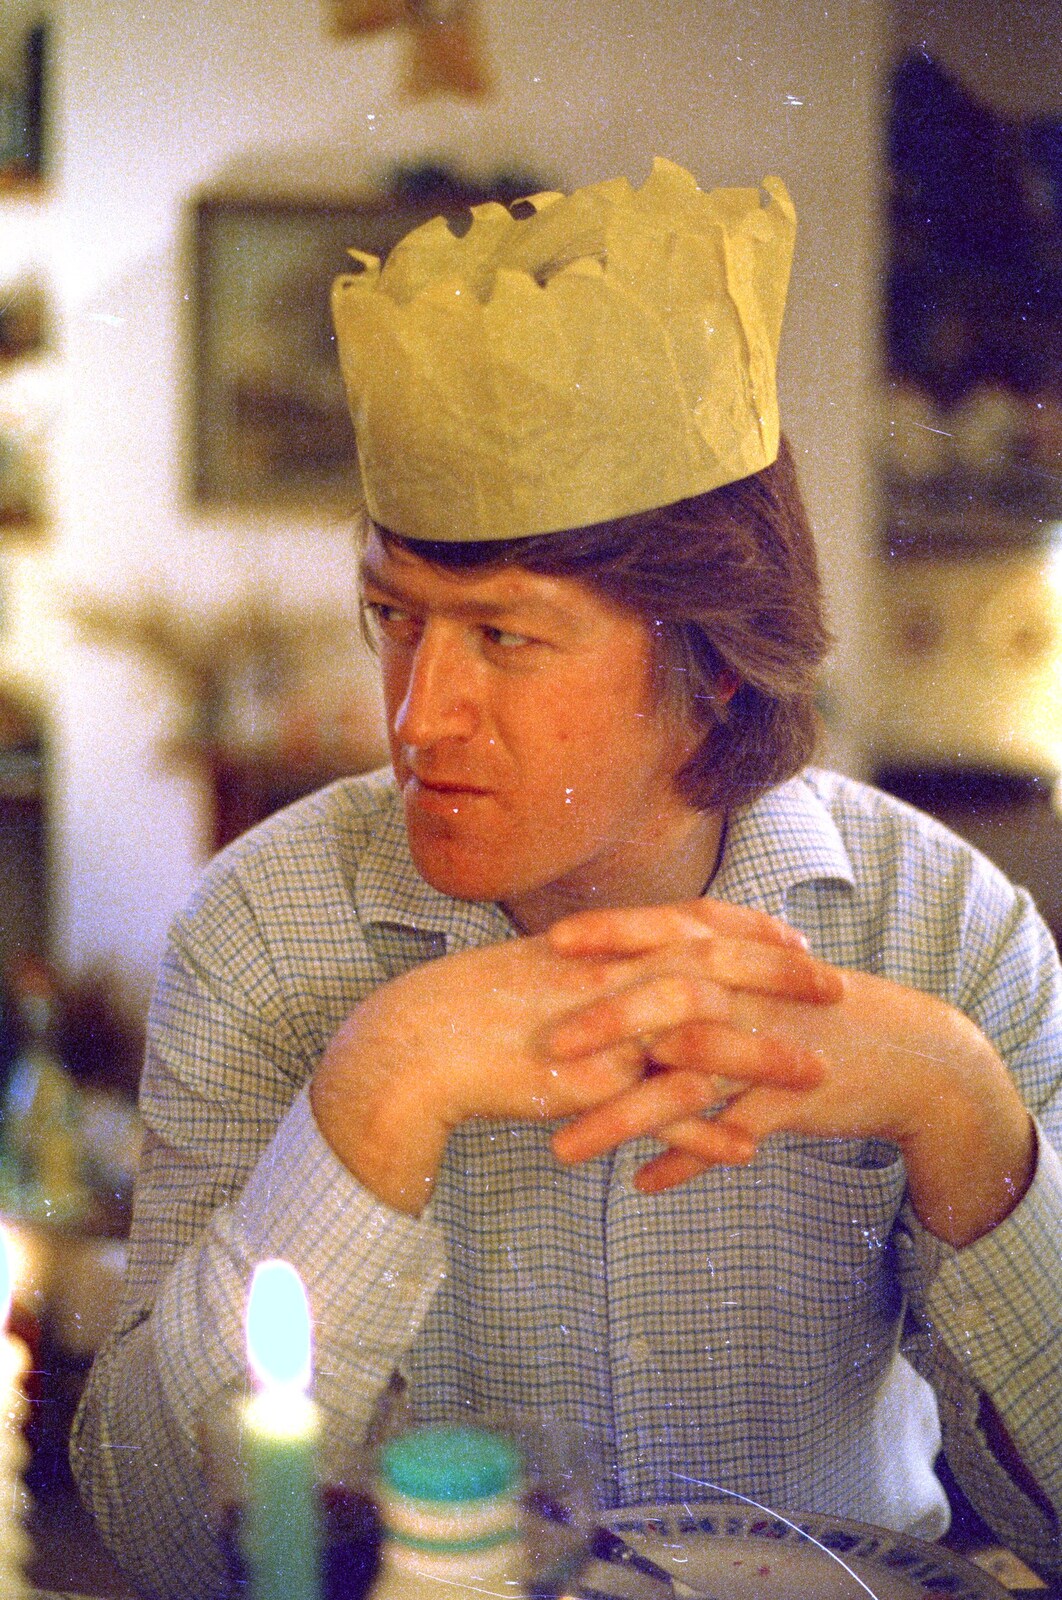 Neil with a Christmas hat from Christmas with Neil and Caroline, Burton, Dorset - 25th December 1986